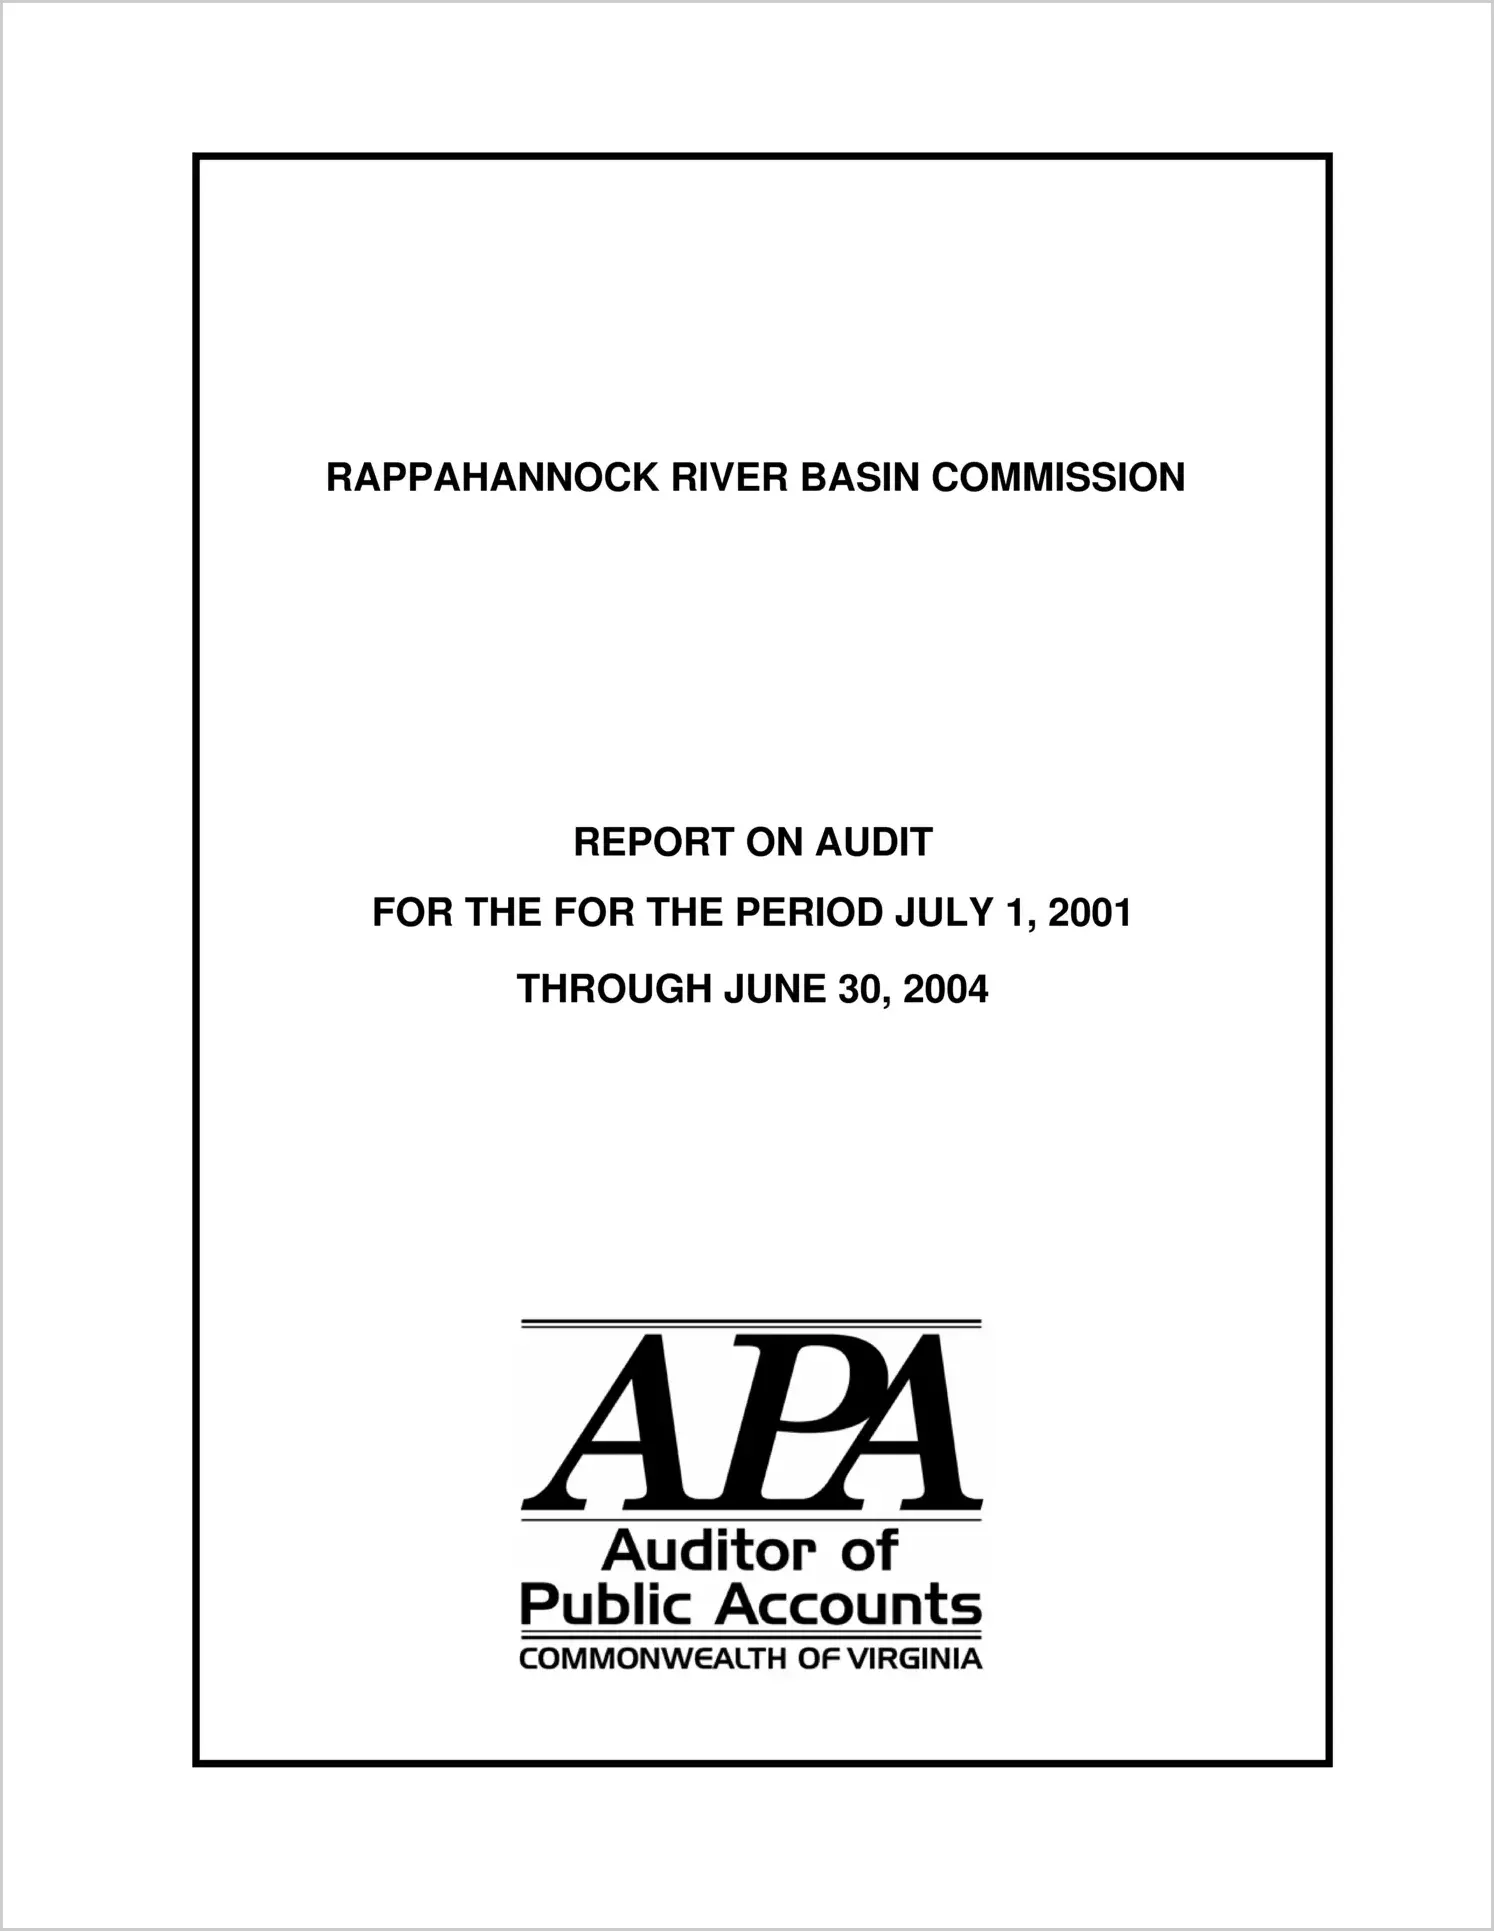 Rappahannock River Basin Commission for the years ended July 1, 2001 and June 30, 2004